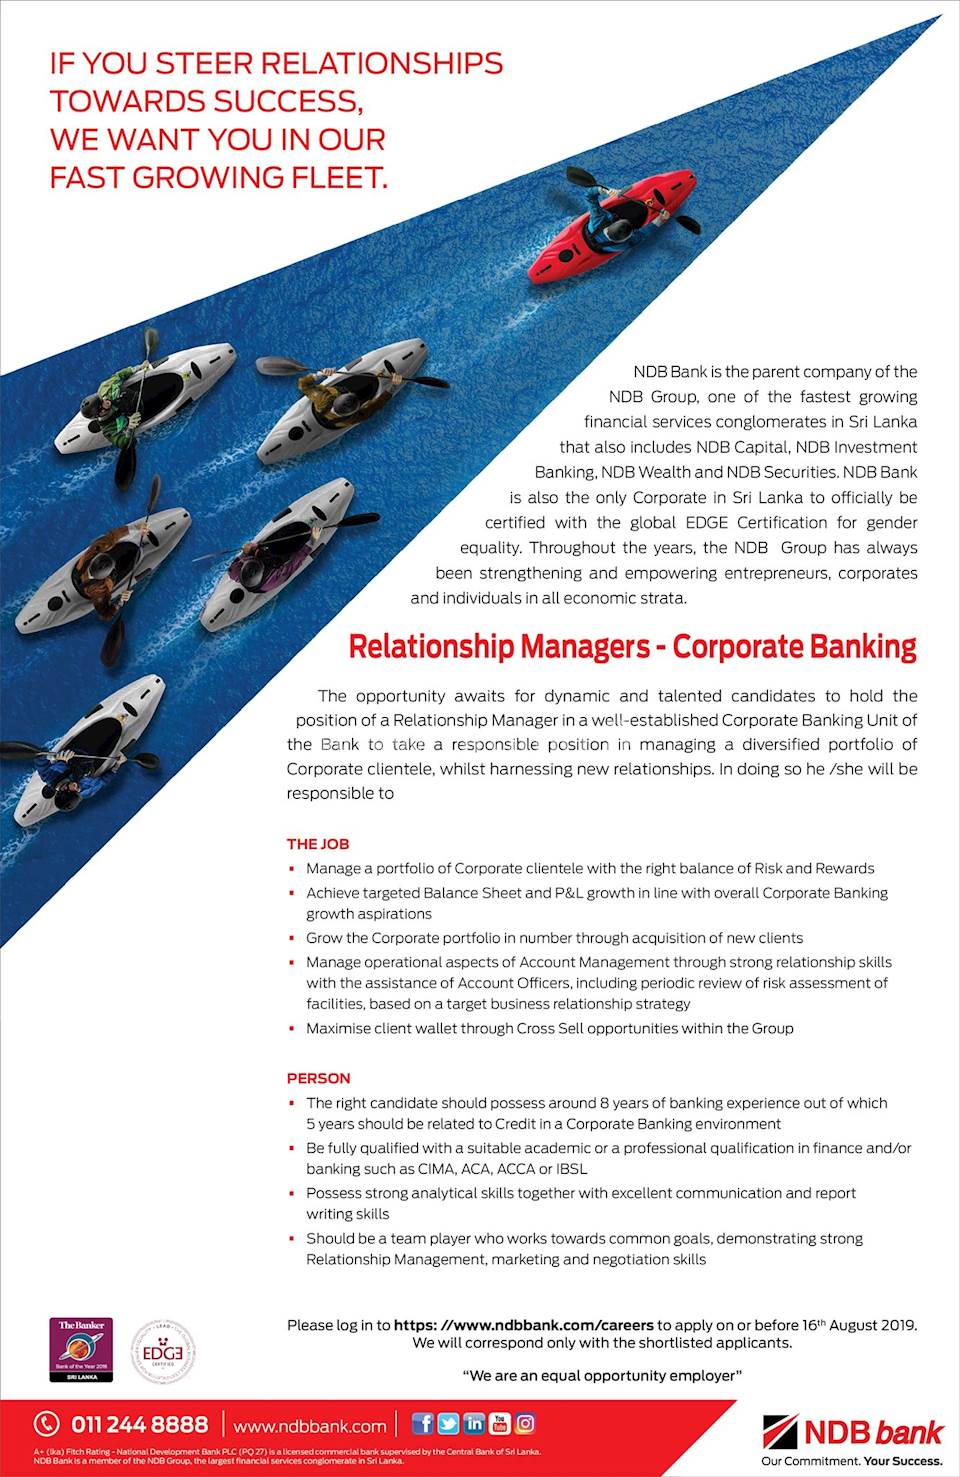 Relationship Managers - Corporate Banking